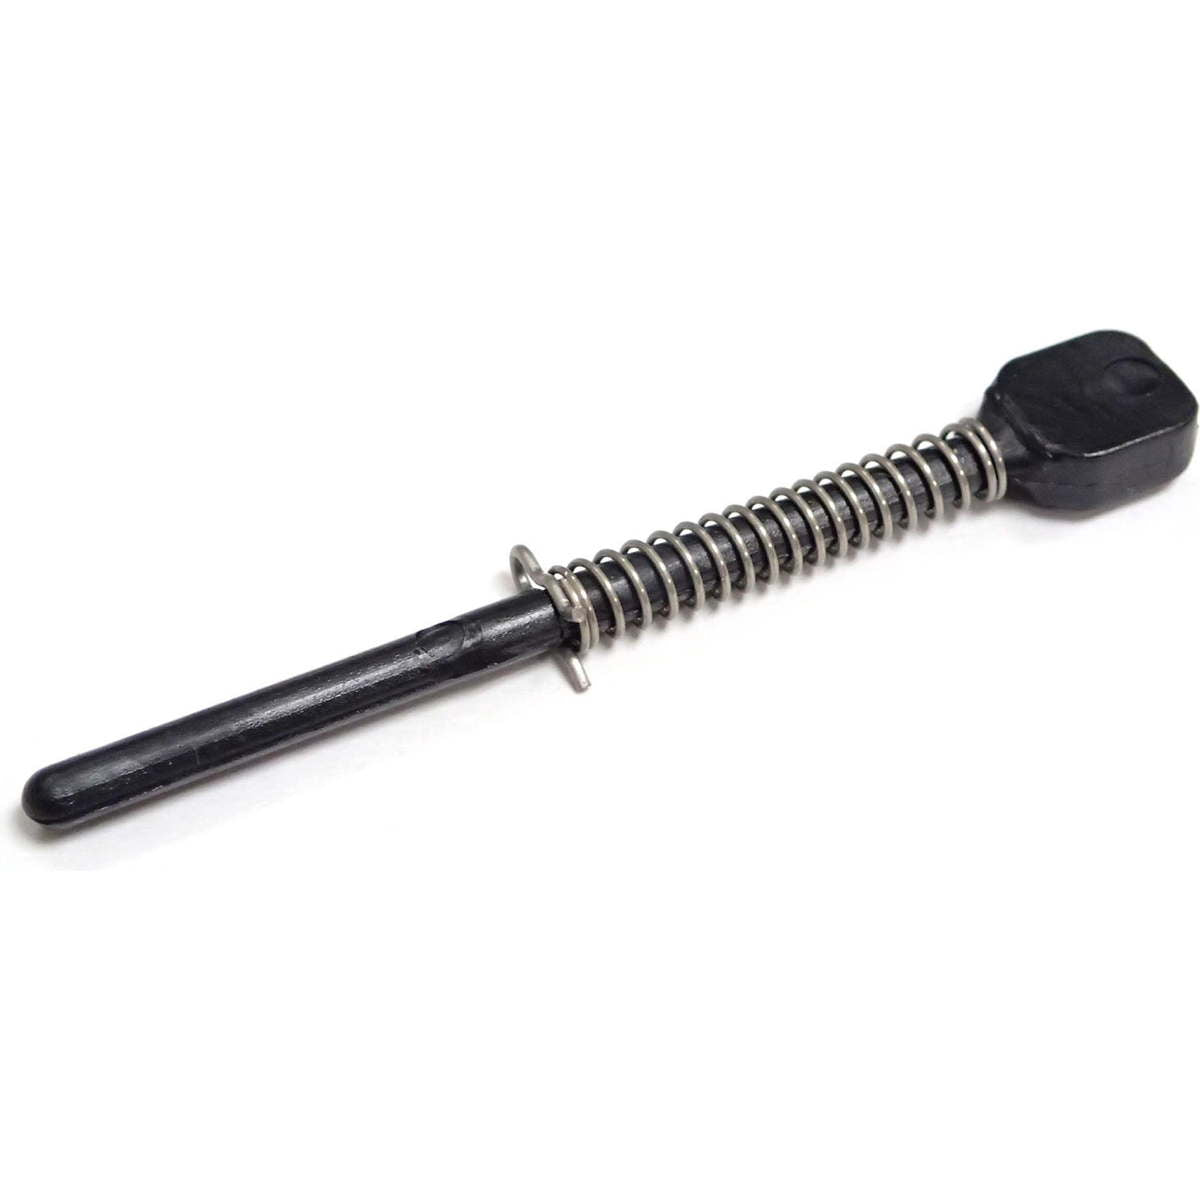 Photo of Church Tackle Replacement Rear Pin Assembly for sale at United Tackle Shops.